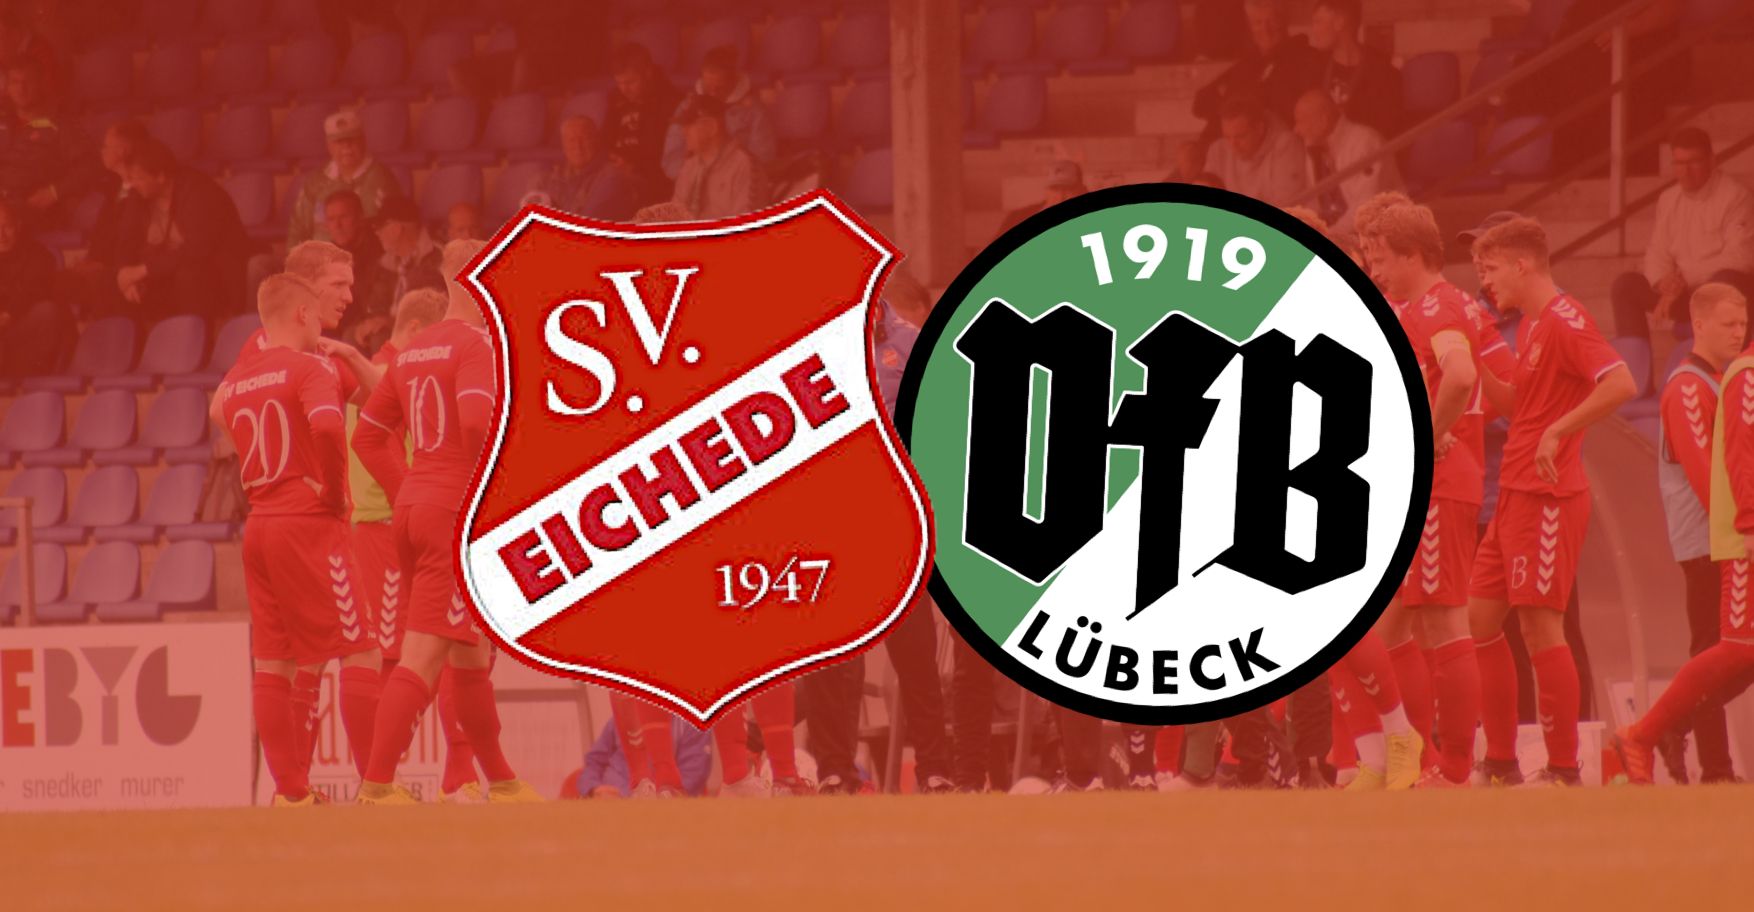 Eichede.Luebeck.BeltCup